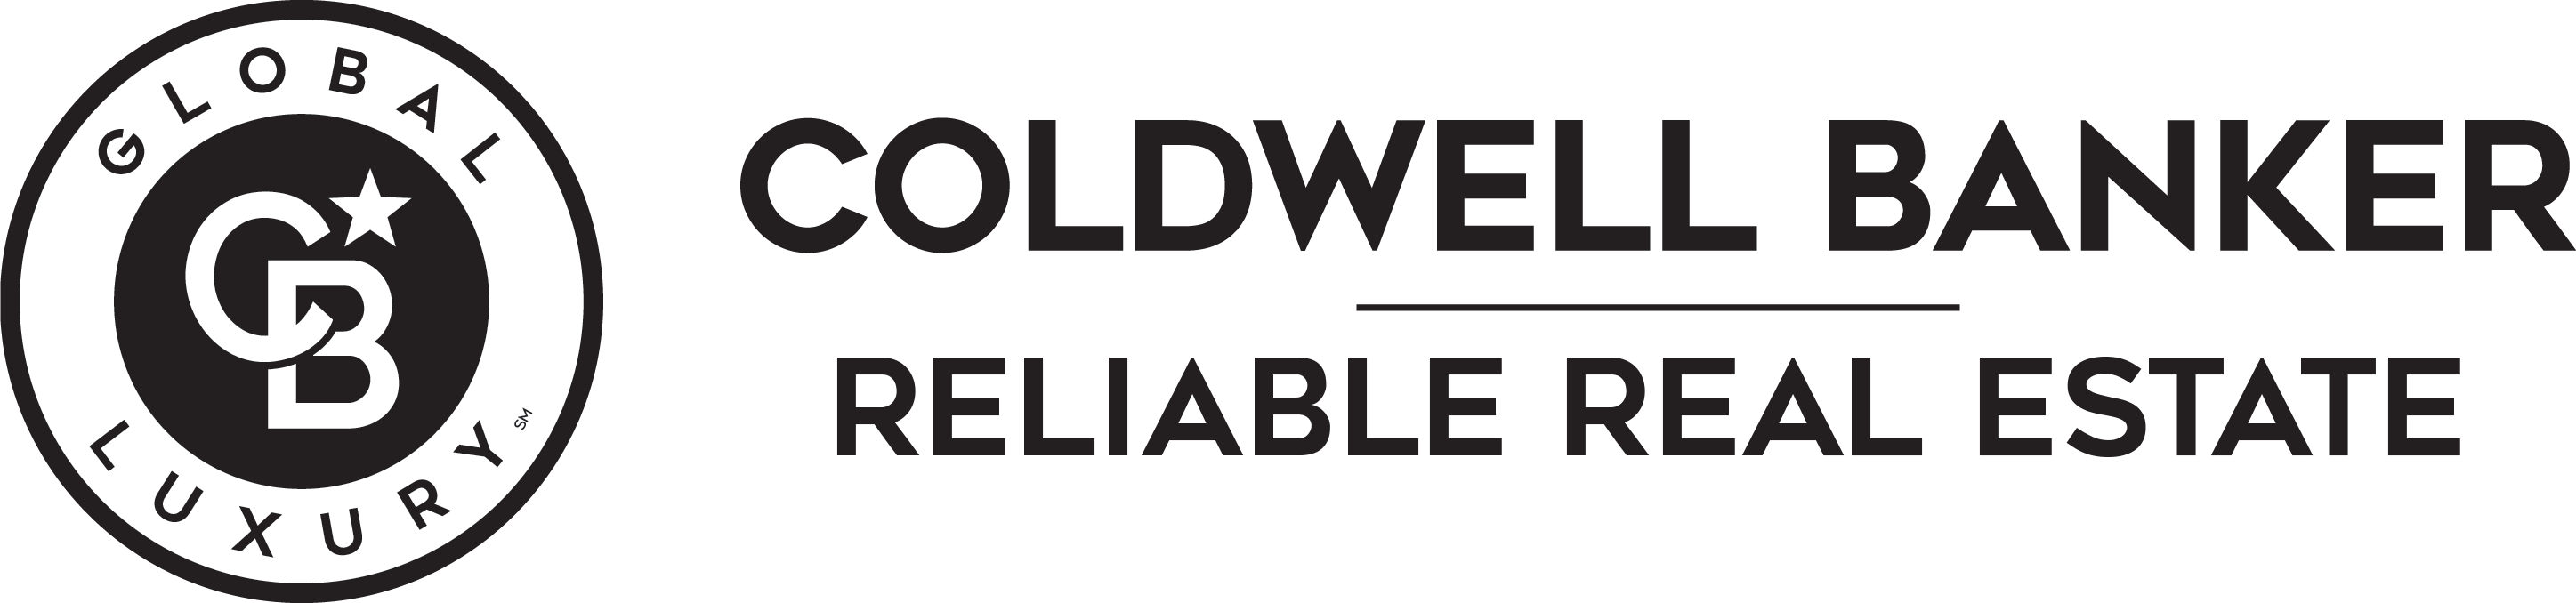 house selling company - Coldwell Banker Reliable Real Estate NY